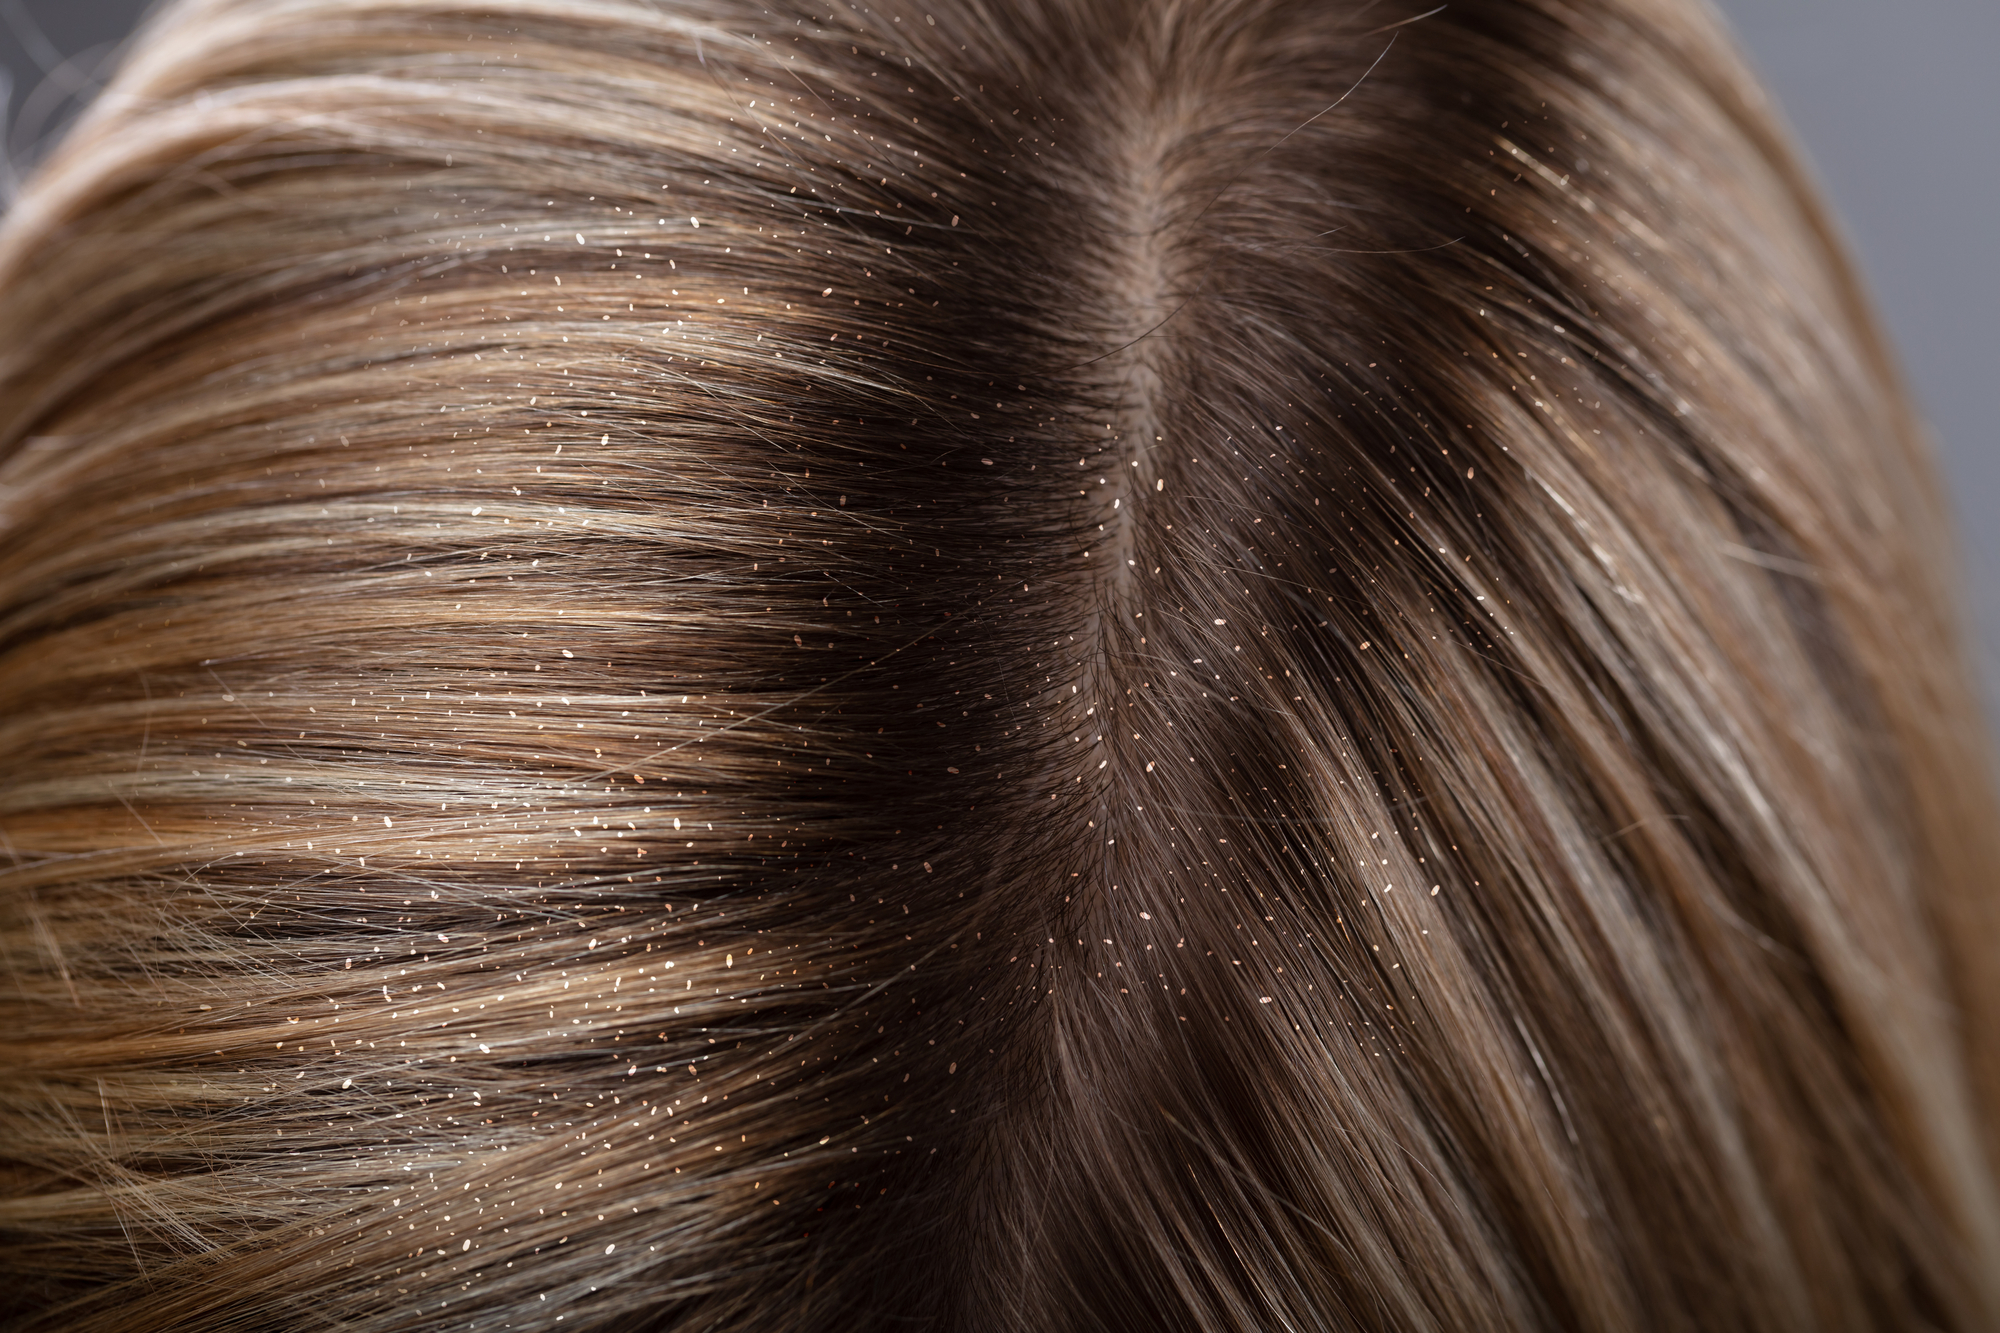 Dry, Irritated Scalp? Could Be Head Lice!